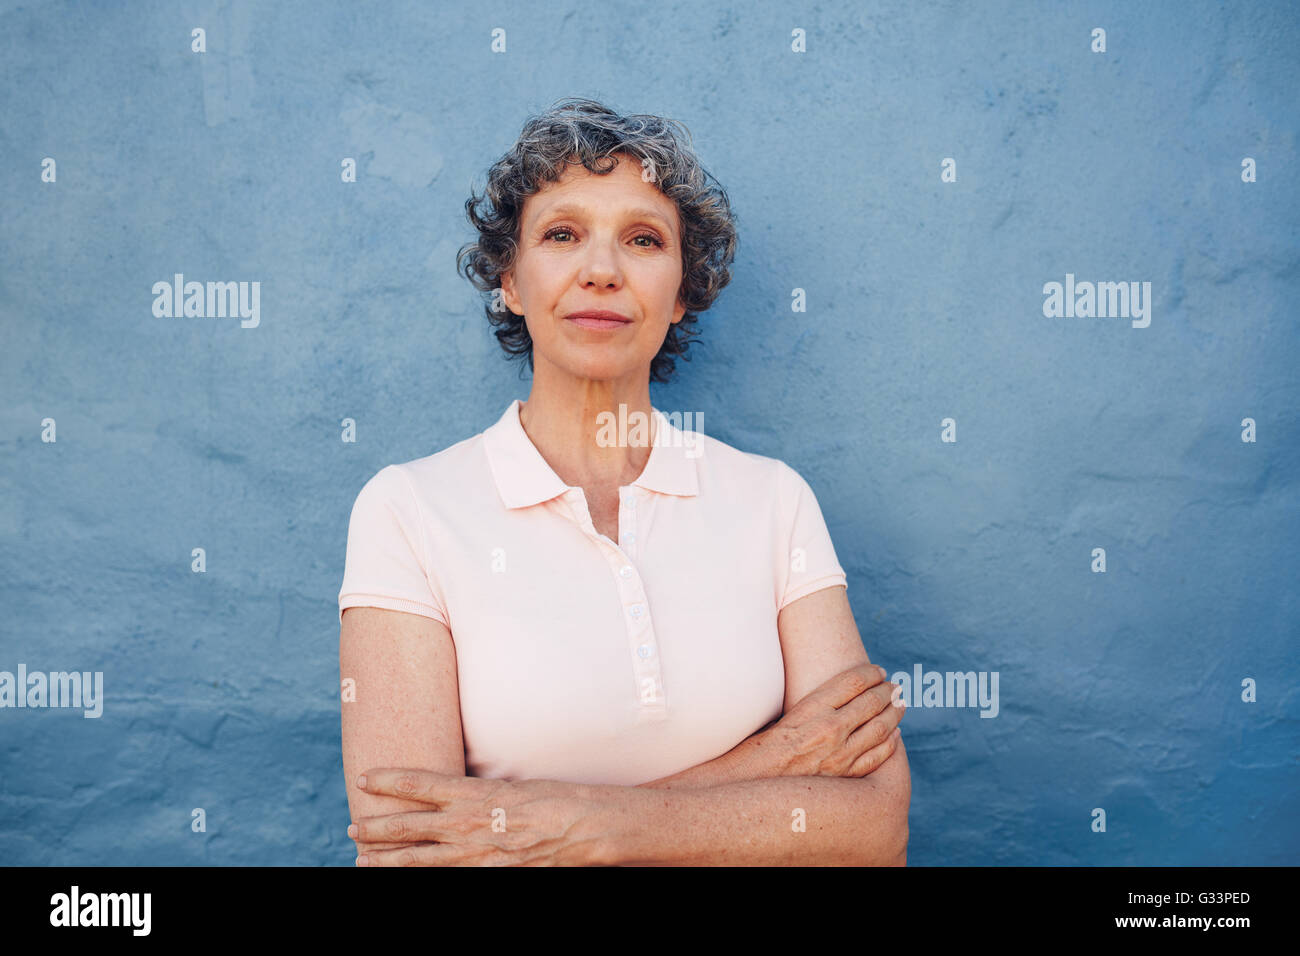 Portrait of confident mature woman standing with her arms crossed against blue background Stock Photo